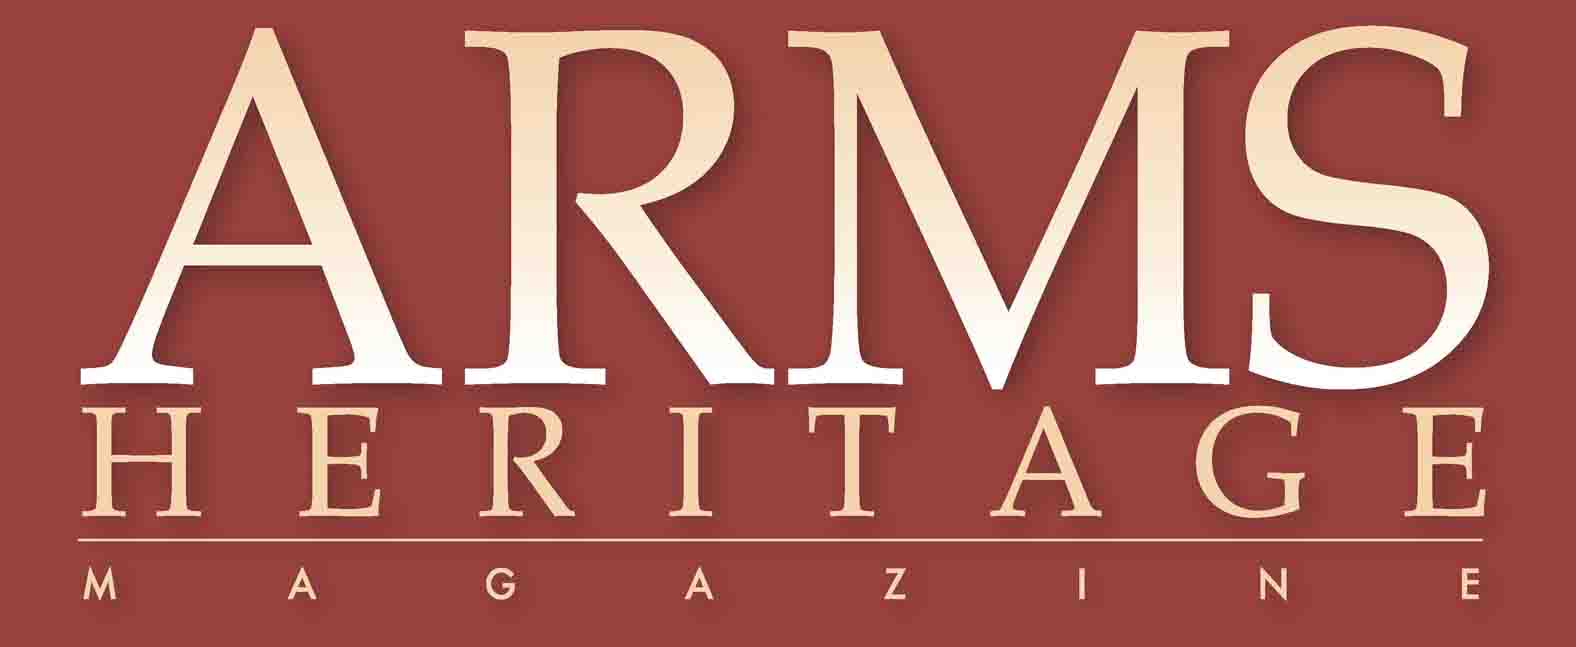 ARMS HERITAGE MAGAZINE - Volume 1, All Six Issues - GB-img-0